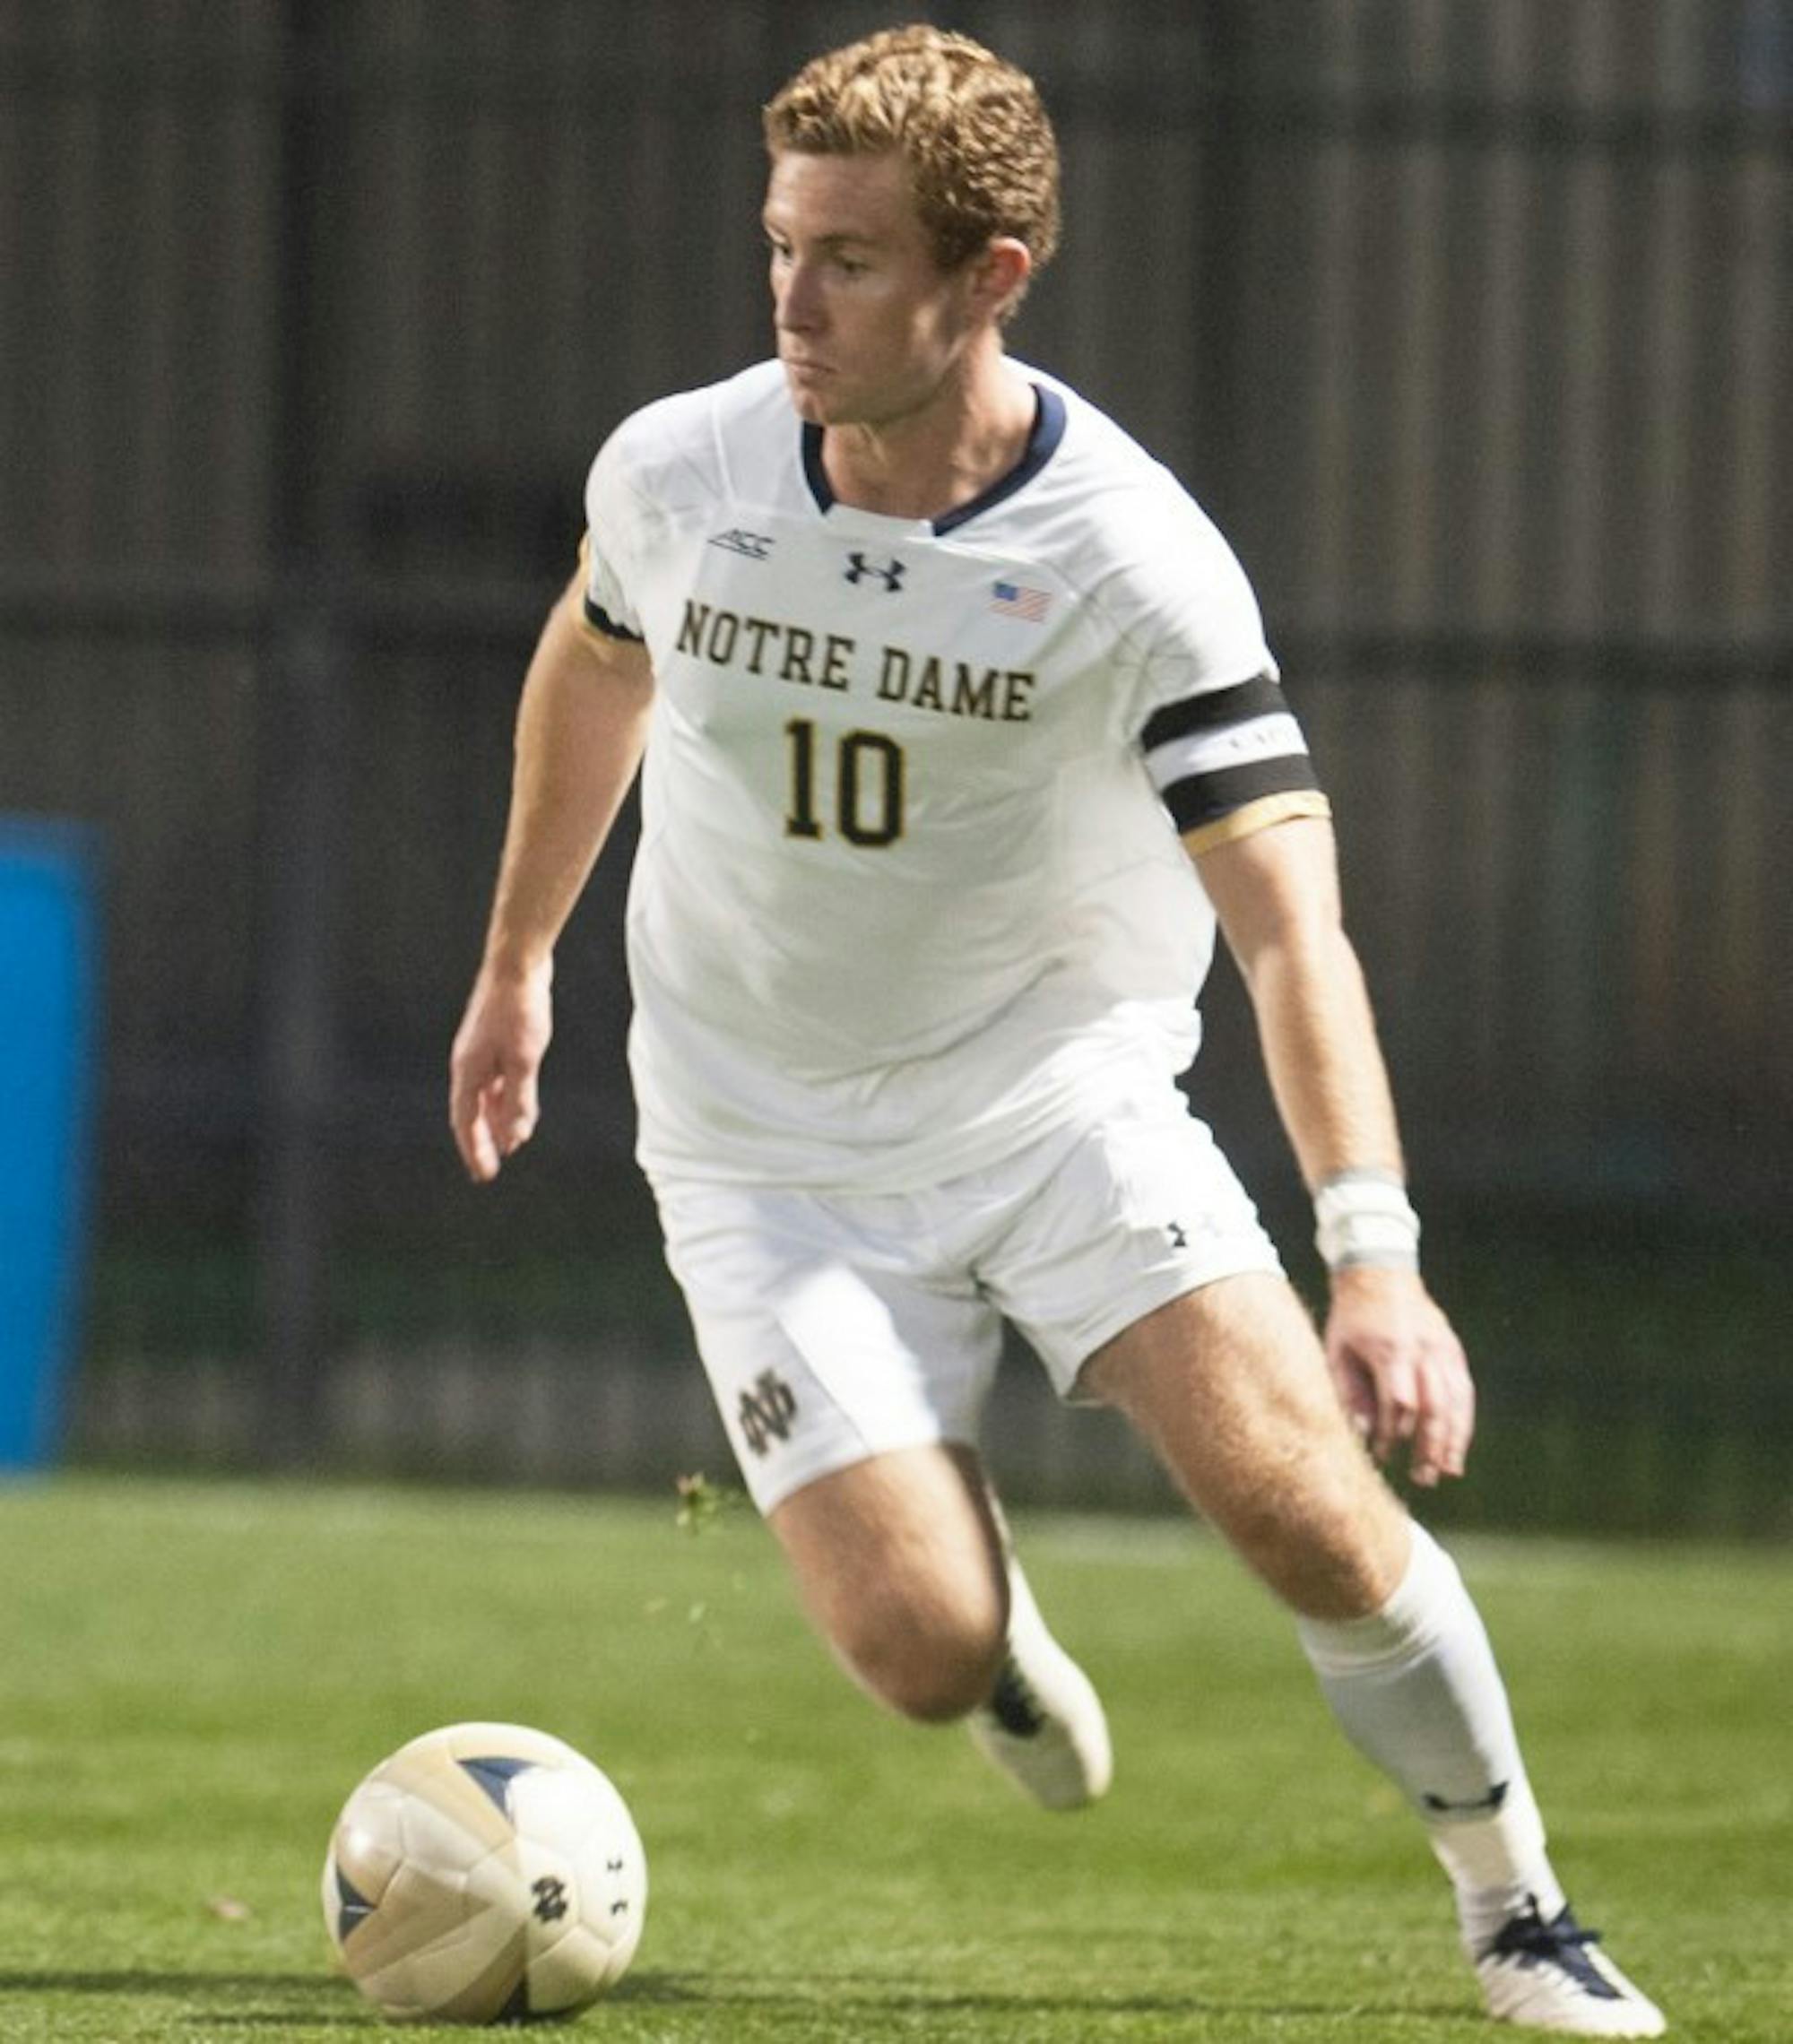 Irish senior Jon Gallagher dribbles the ball during Notre Dame’s 3-1 victory over Michigan on  Tuesday at Alumni Stadium. Gallagher leads Notre Dame in goals and points scored on the season.